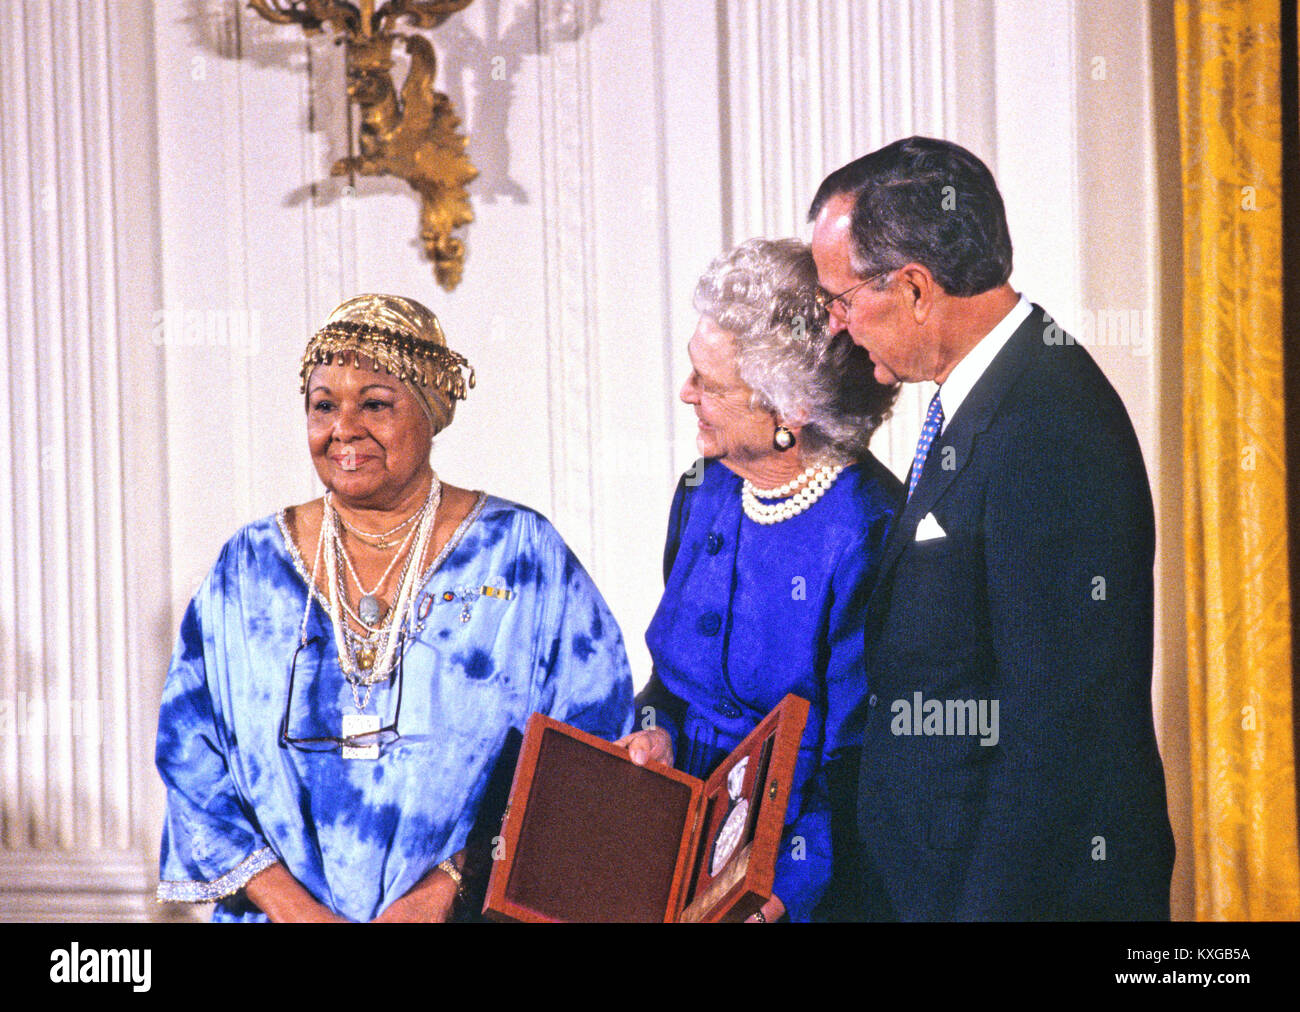 United States President George H.W. Bush and first lady Barbara Bush present the National Medal of Arts to American dancer and choreographer Katherine Dunham during a ceremony in the East Room of the White House in Washington, DC on November 19, 1989. Credit: Ron Sachs/CNP - NO WIRE SERVICE · Photo: Ron Sachs/Consolidated News Photos/Ron Sachs - CNP Stock Photo